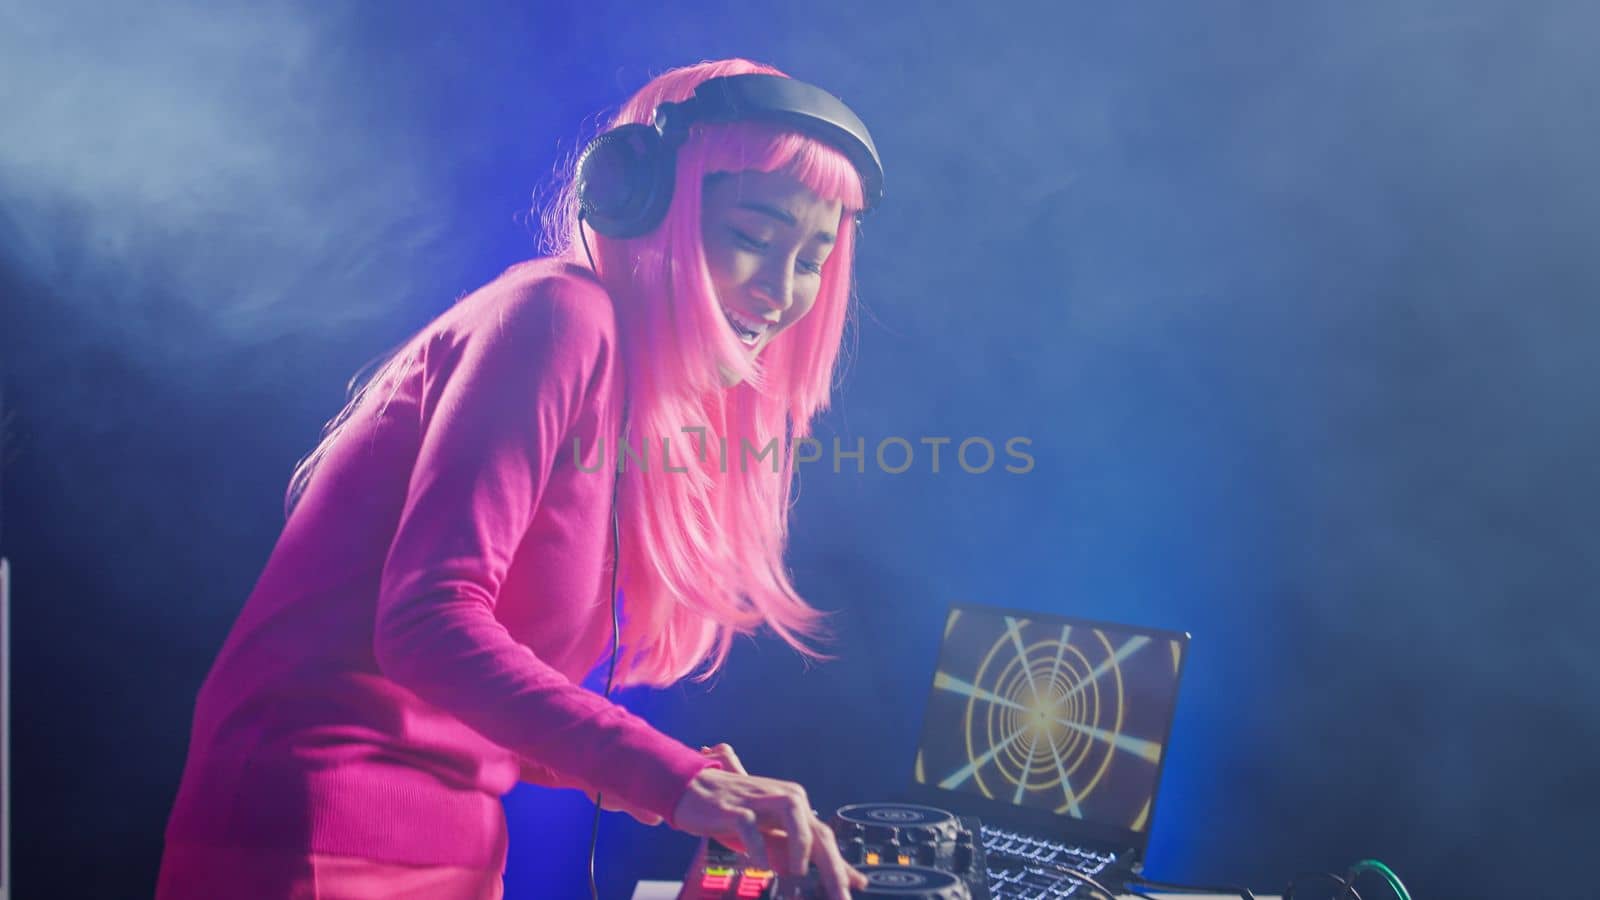 Smiling artist standing at dj table playing electronic music by DCStudio